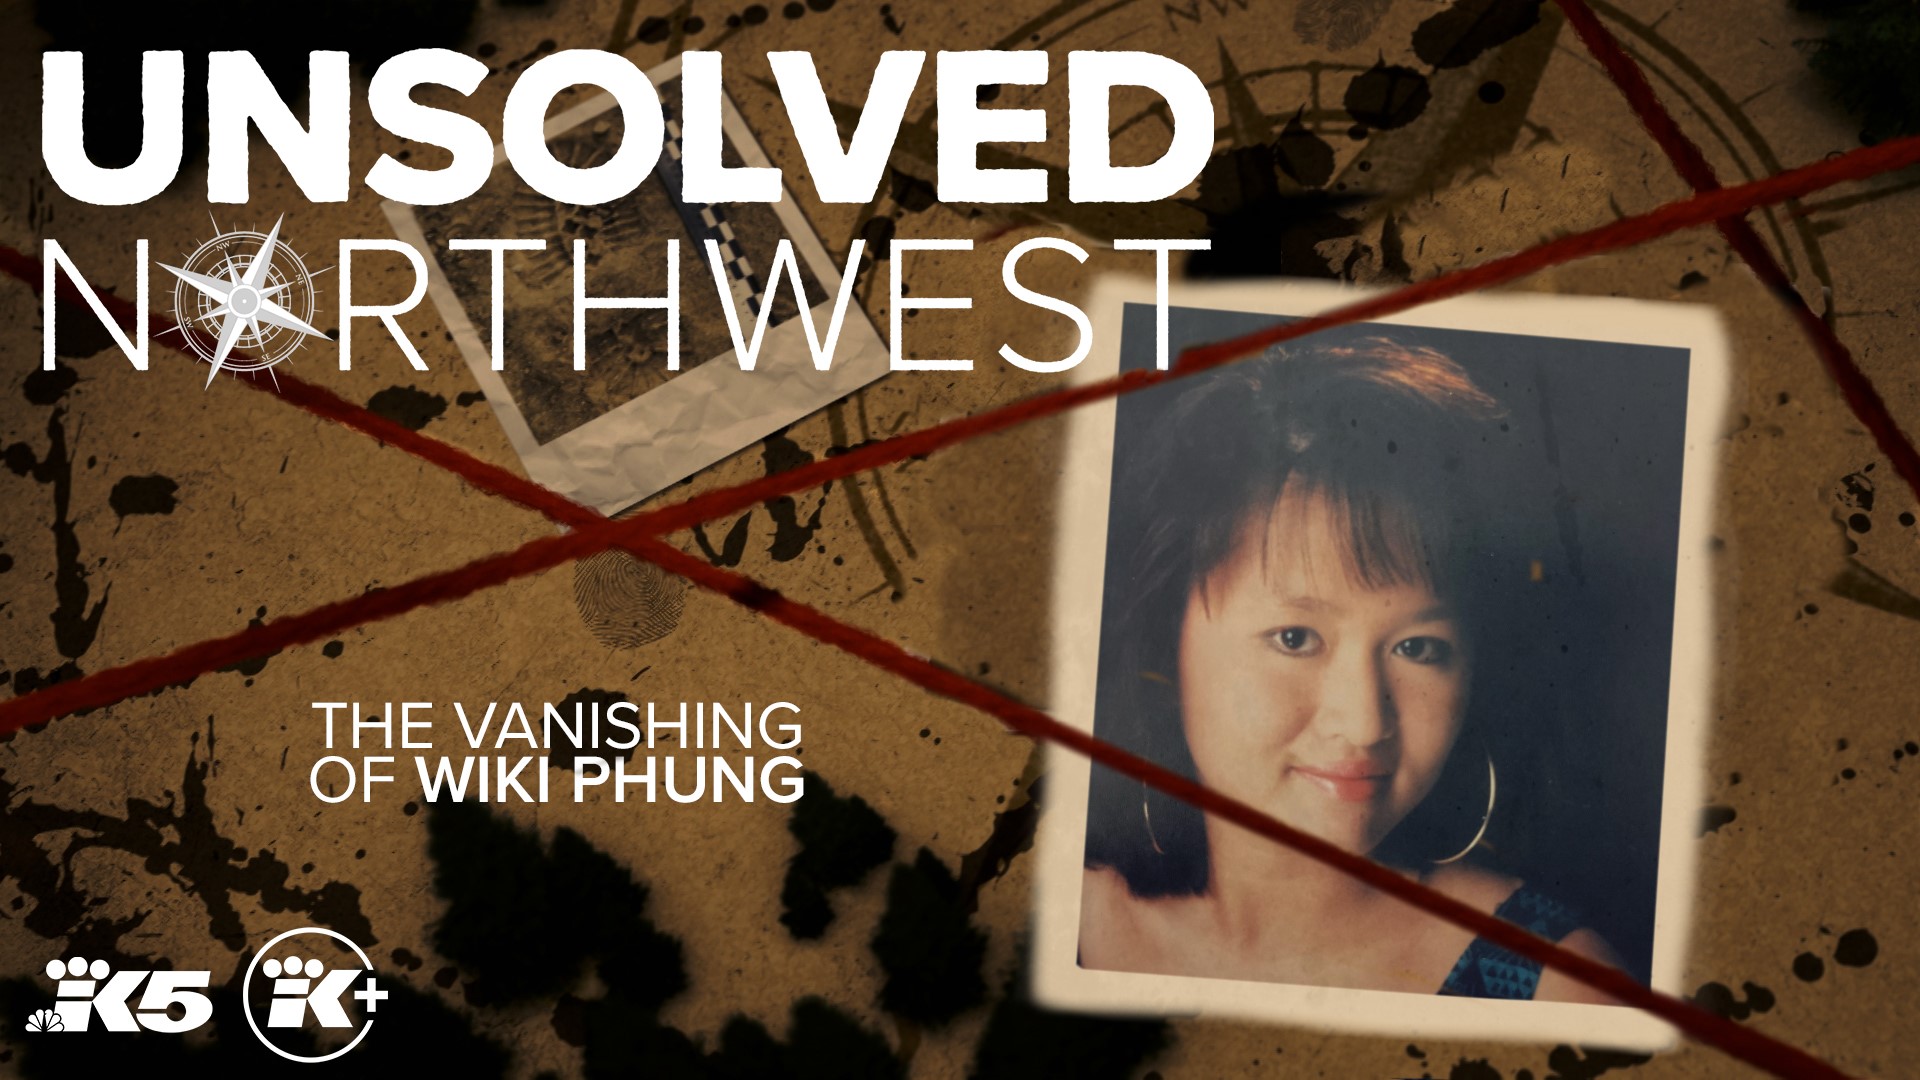 Wiki Phung, 19, went missing on May 9, 1991. After her disappearance, her family learned details about her secret life.